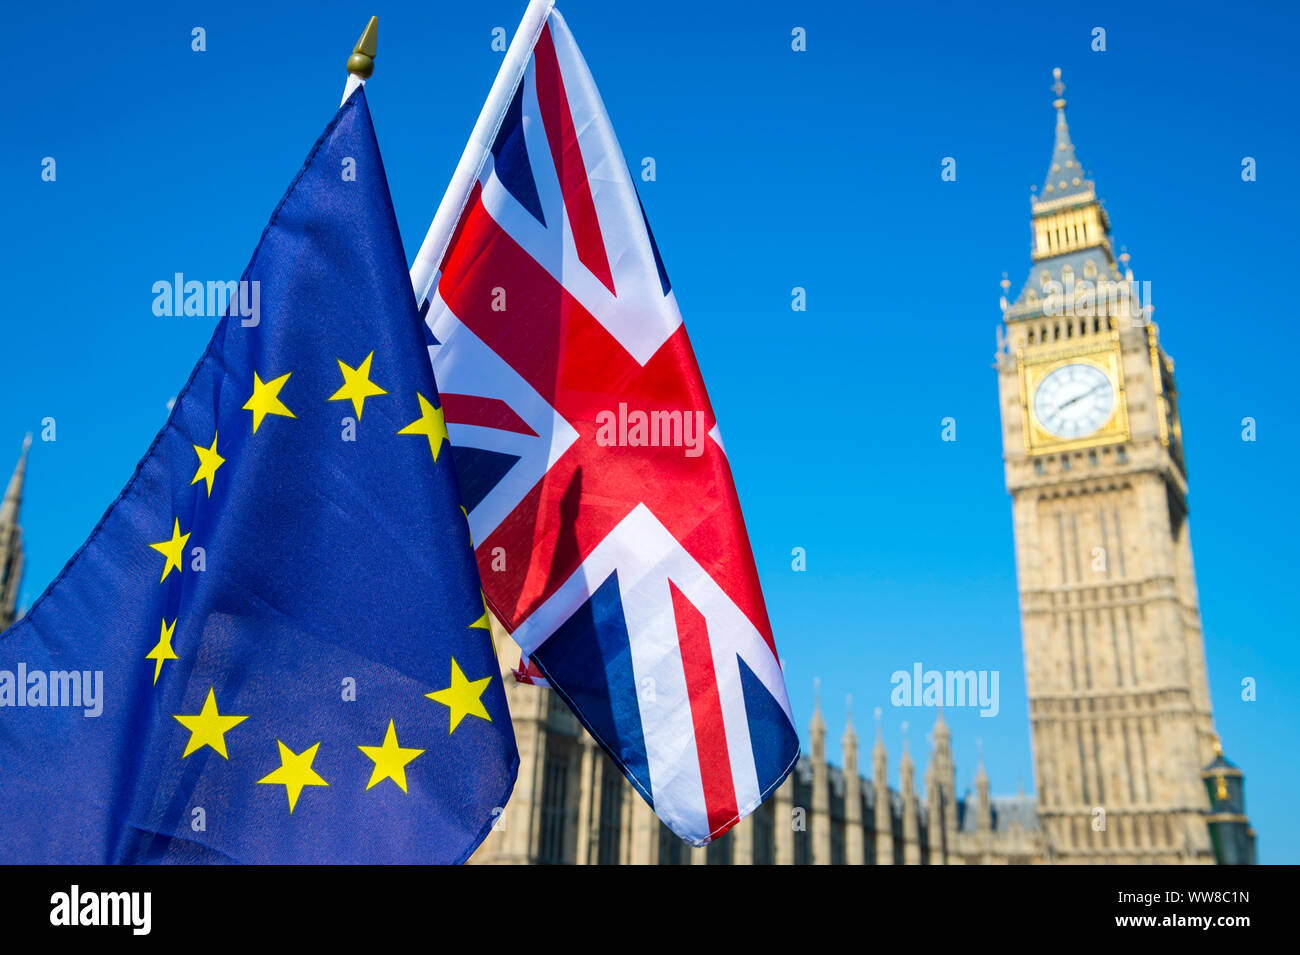 European Union and British Union Jack flag hanging at Big Ben and the Houses of Parliament at Westminster Palace, London, in preparation for Brexit Stock Photo